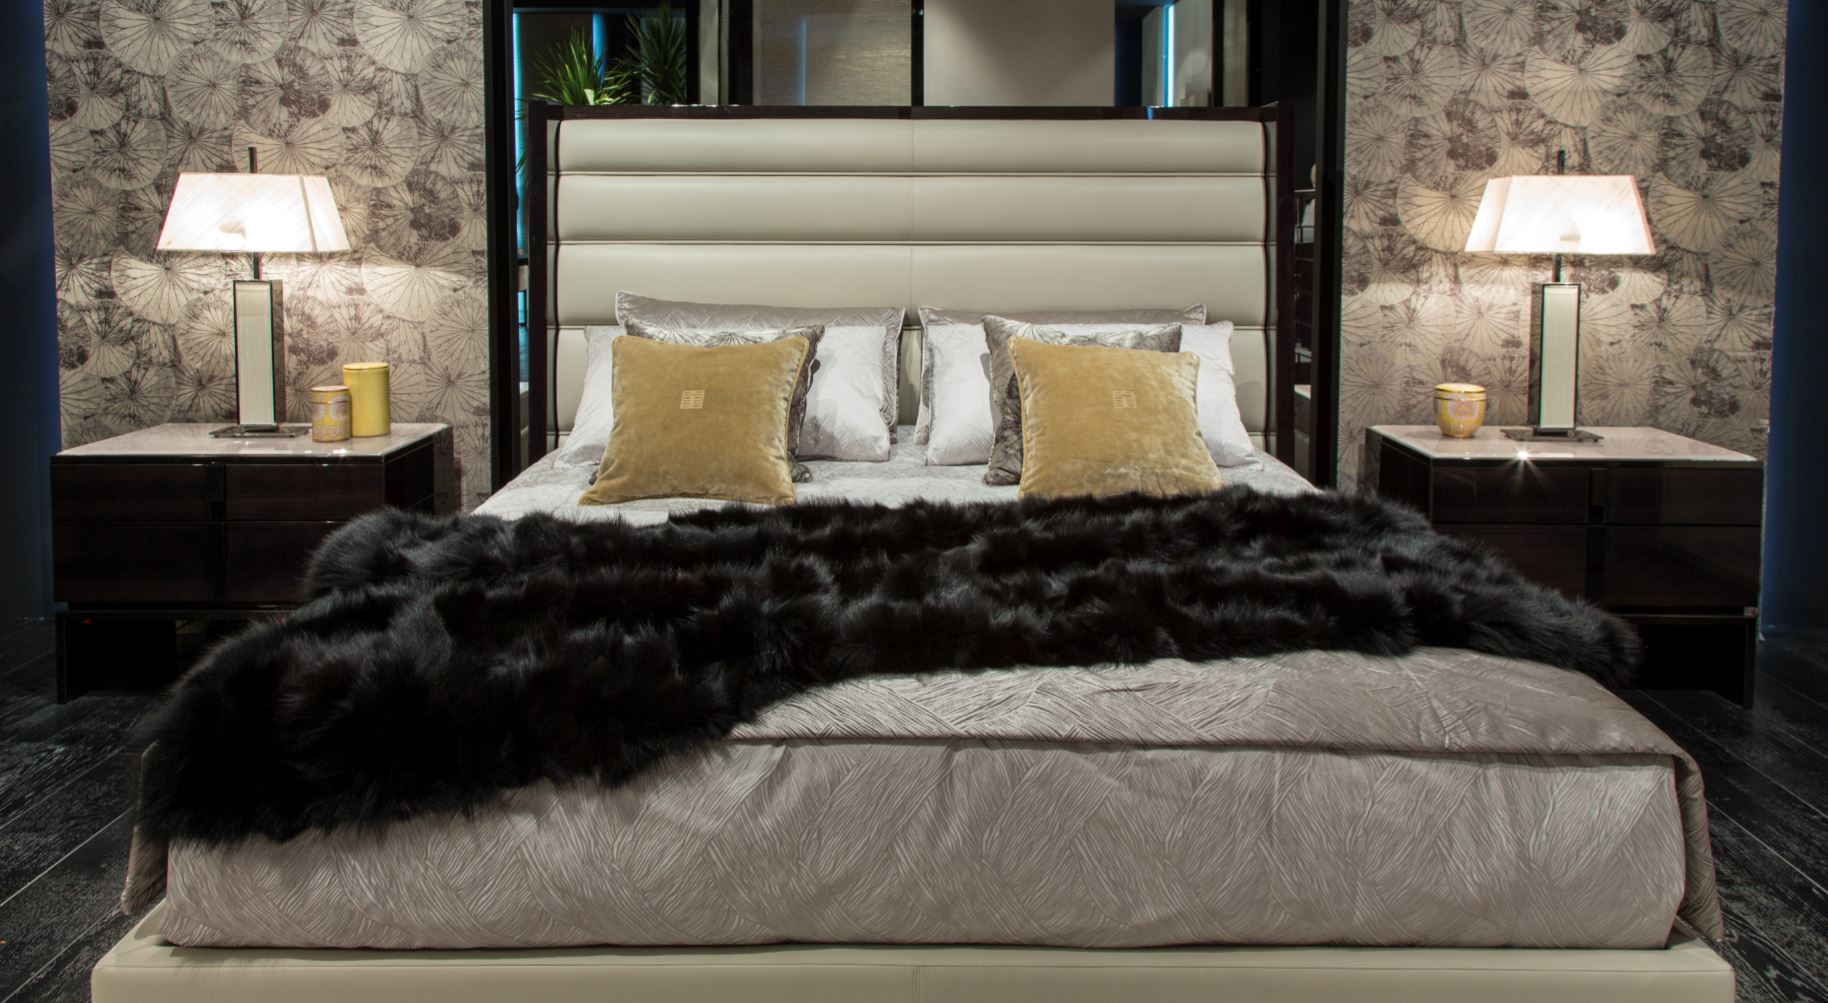 black and more bed with lamps